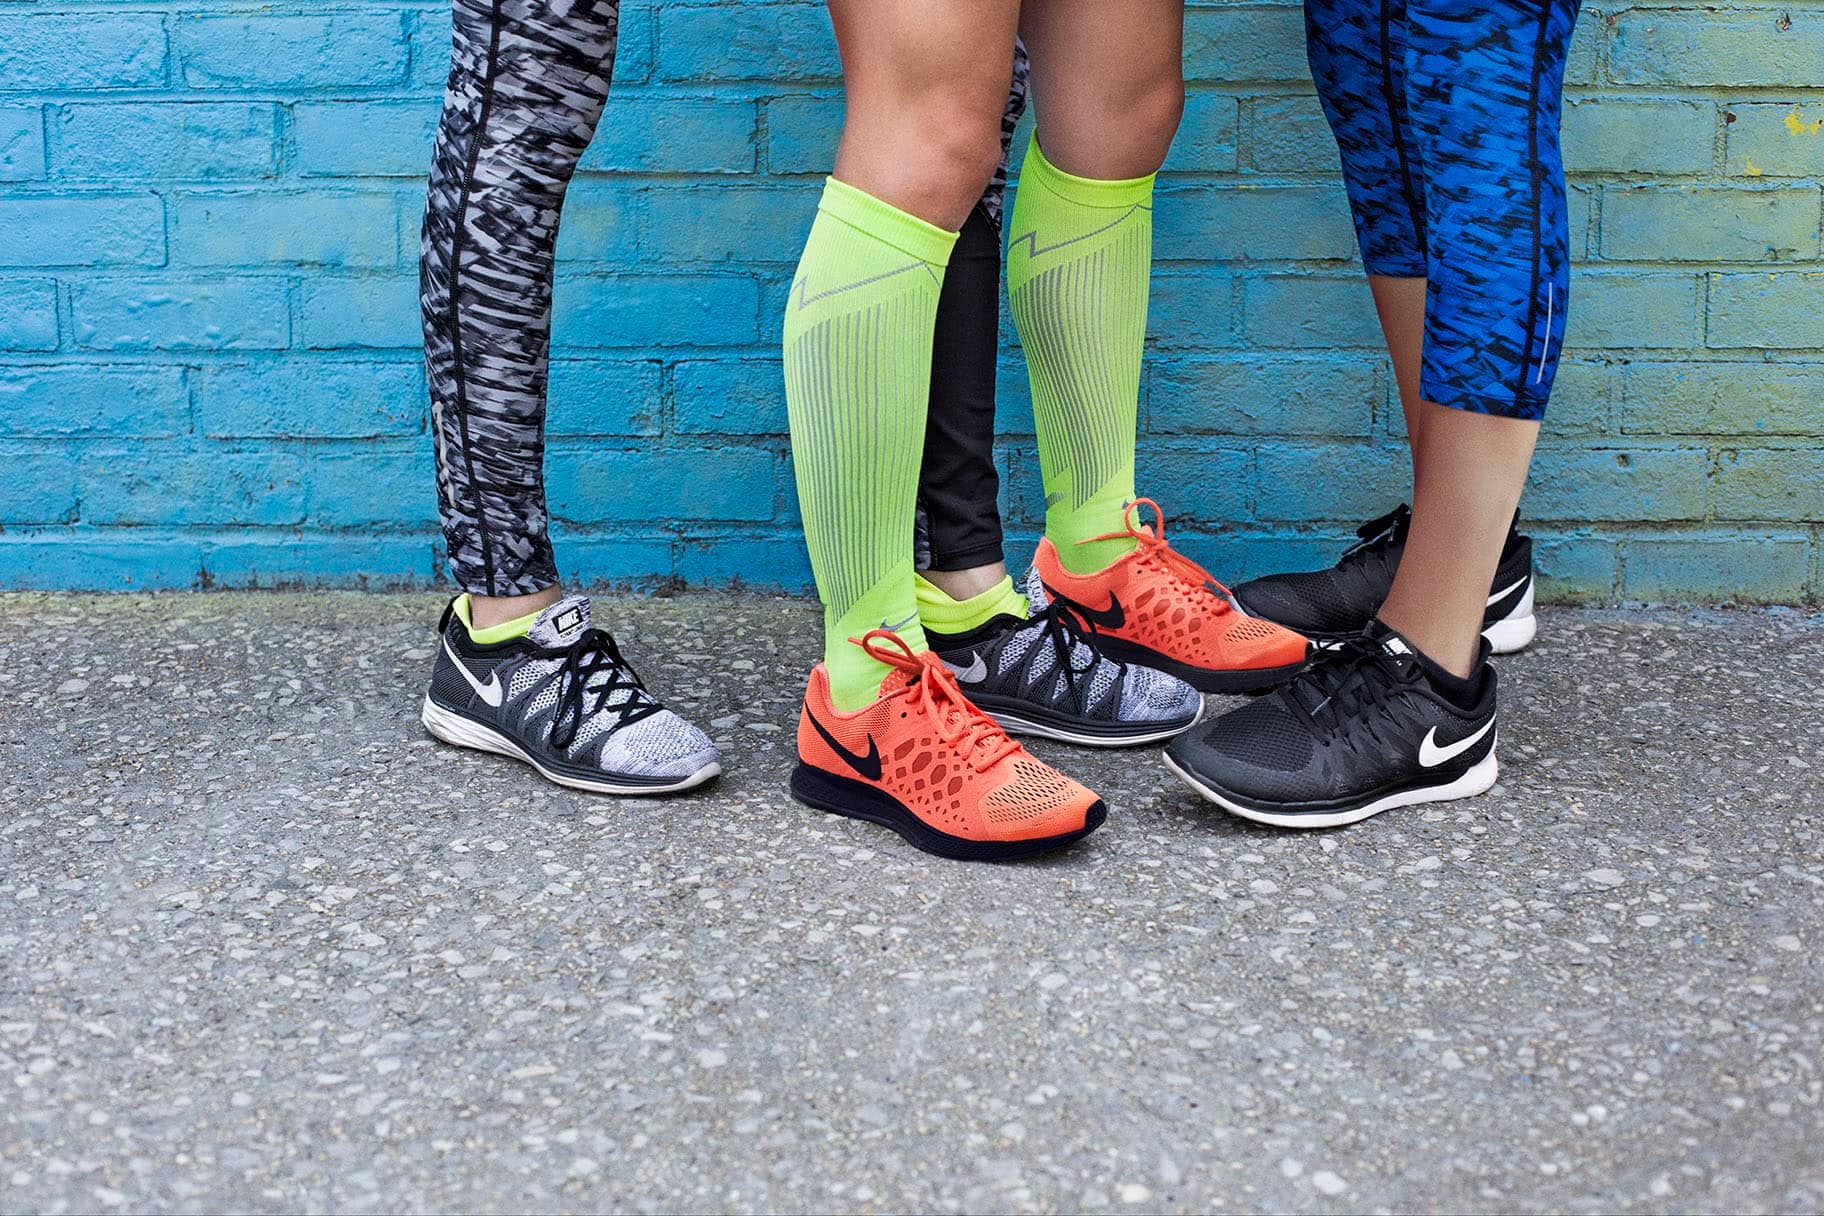 How to Pick the Best Compression Socks for Running. Nike.com